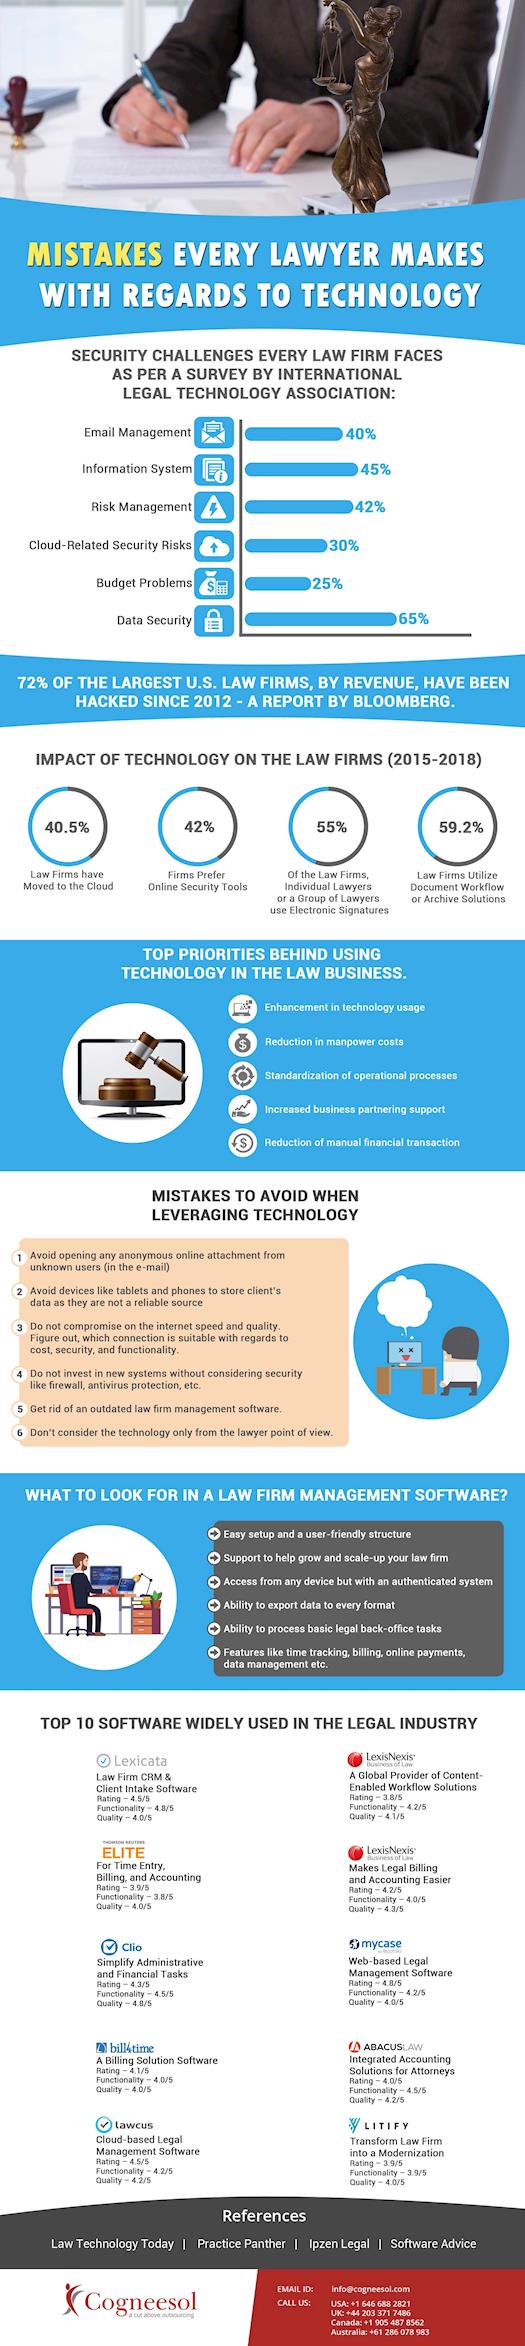 Common Mistakes Lawyers Make With Technology